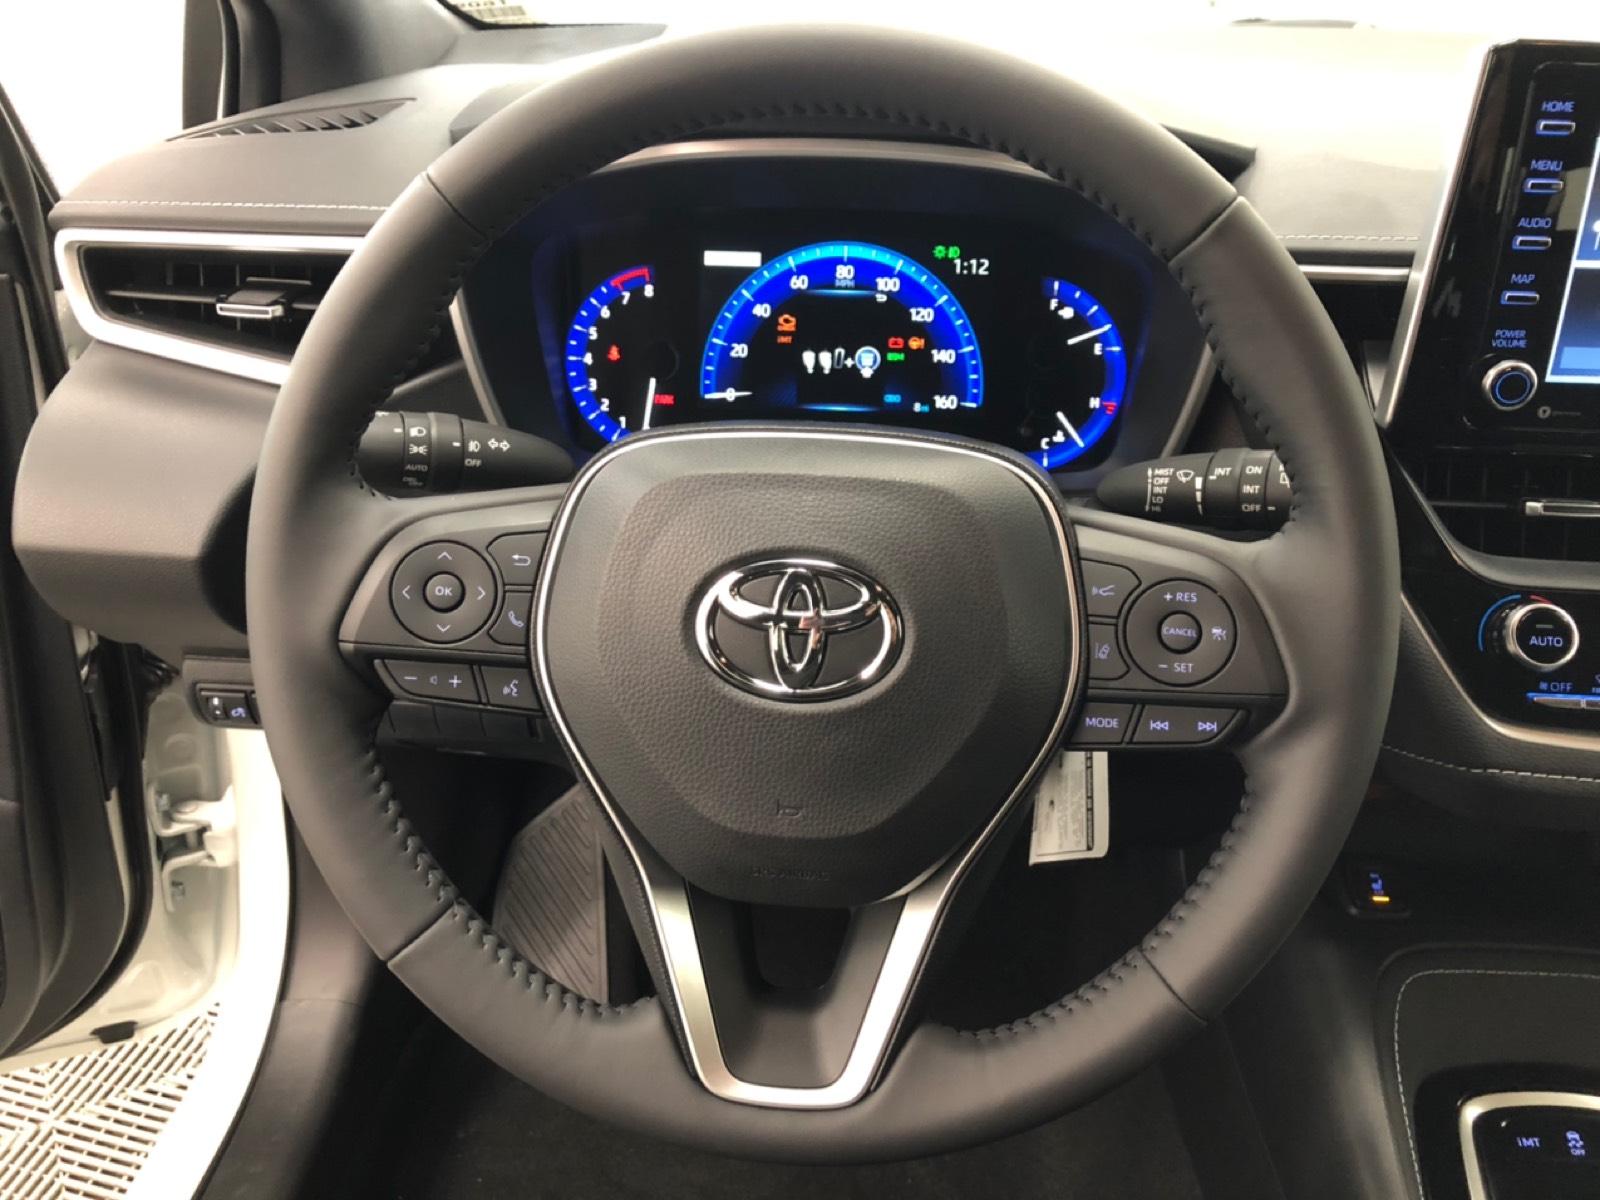 New 2020 Toyota Corolla Hatchback XSE Manual 4dr Car in